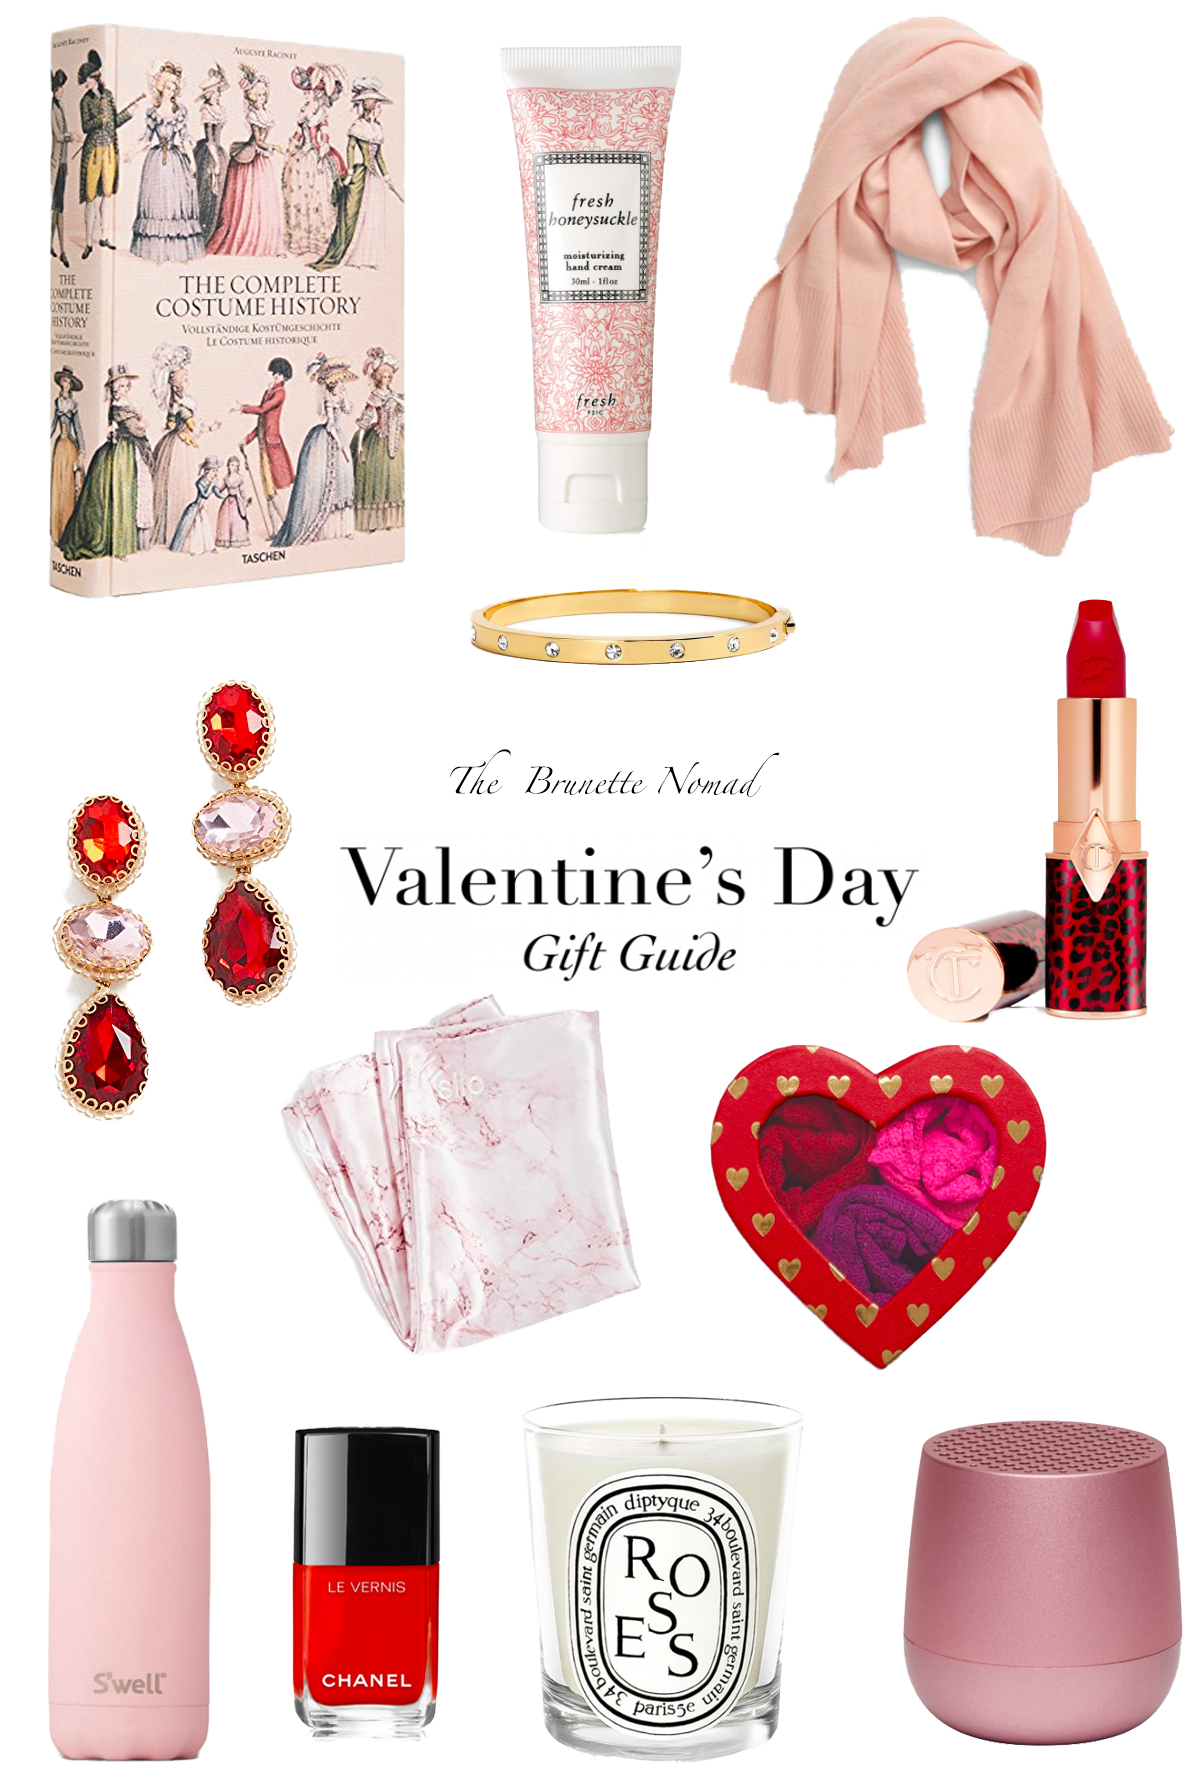 valentine's day gift guide collage